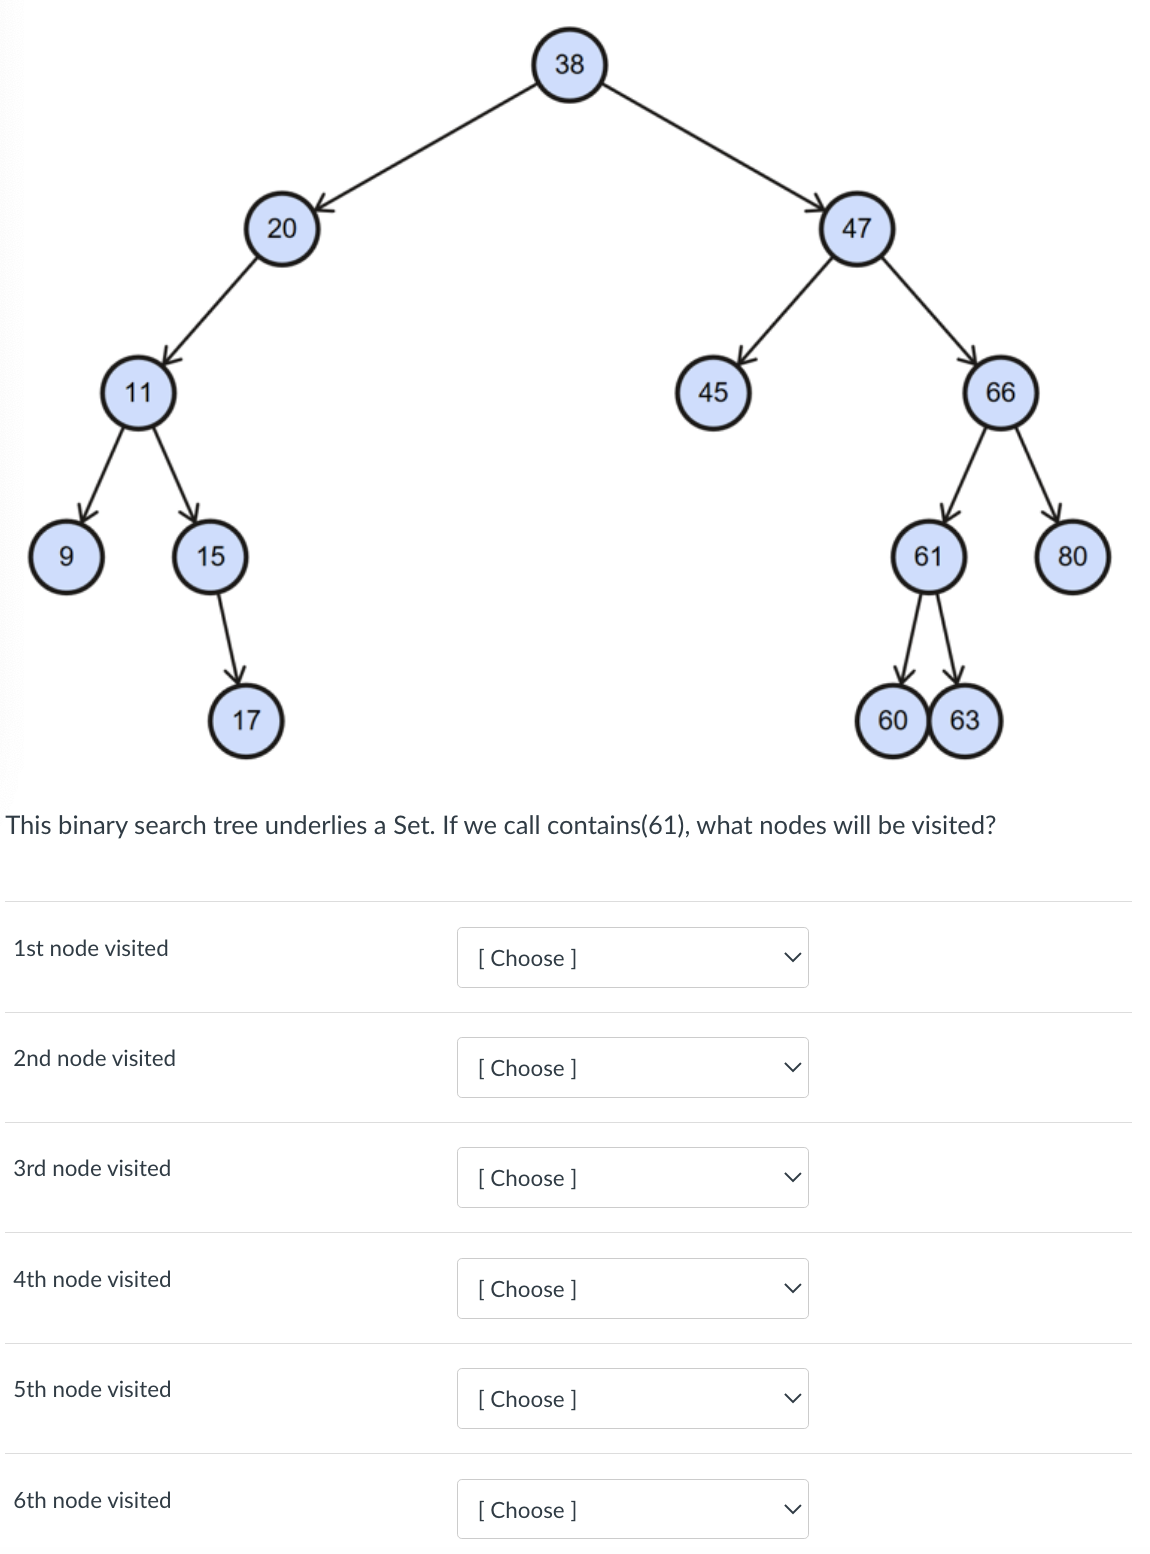 38
47
11
45
66
15
61
80
17
60 Y 63
This binary search tree underlies a Set. If we call contains(61), what nodes will be visited?
1st node visited
[ Choose ]
2nd node visited
[ Choose ]
3rd node visited
[ Choose ]
4th node visited
[ Choose ]
5th node visited
[ Choose ]
6th node visited
[ Choose ]
>
>
>
>
20
